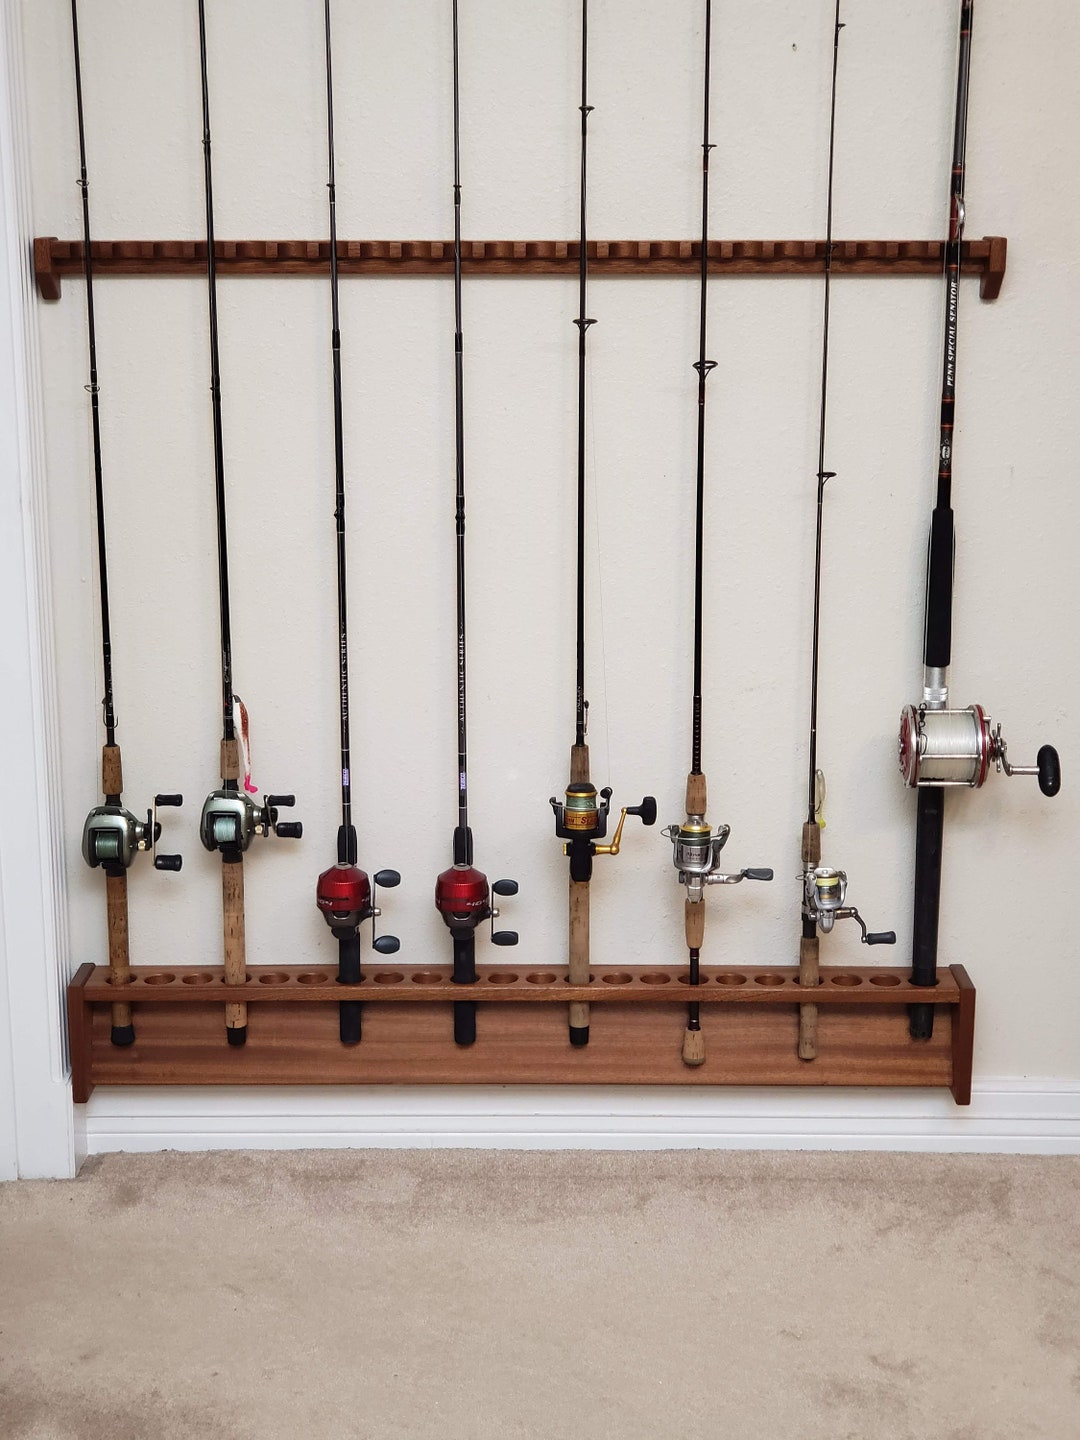 Solid Mahogany Rod Rack, 46 Inch Wall Mounted Built in Fishing Pole Holder,  Real Estate Closing Gift for Fisherman Outdoorsman Hunting Cabin -  UK